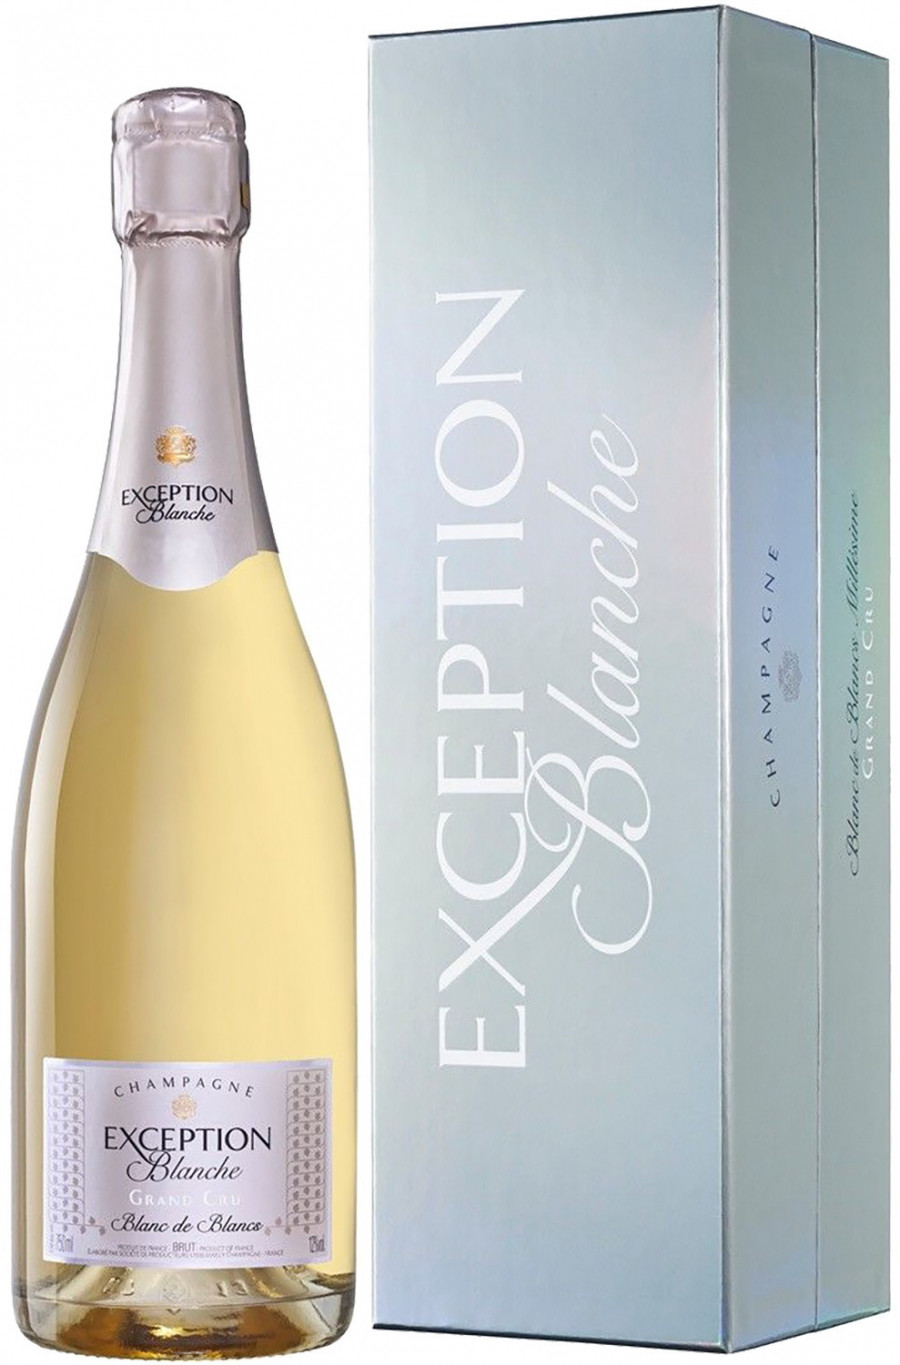 Mailly Grand Cru, Exception Blanche, Blanc De Blancs Millesime, Champagne, gift box